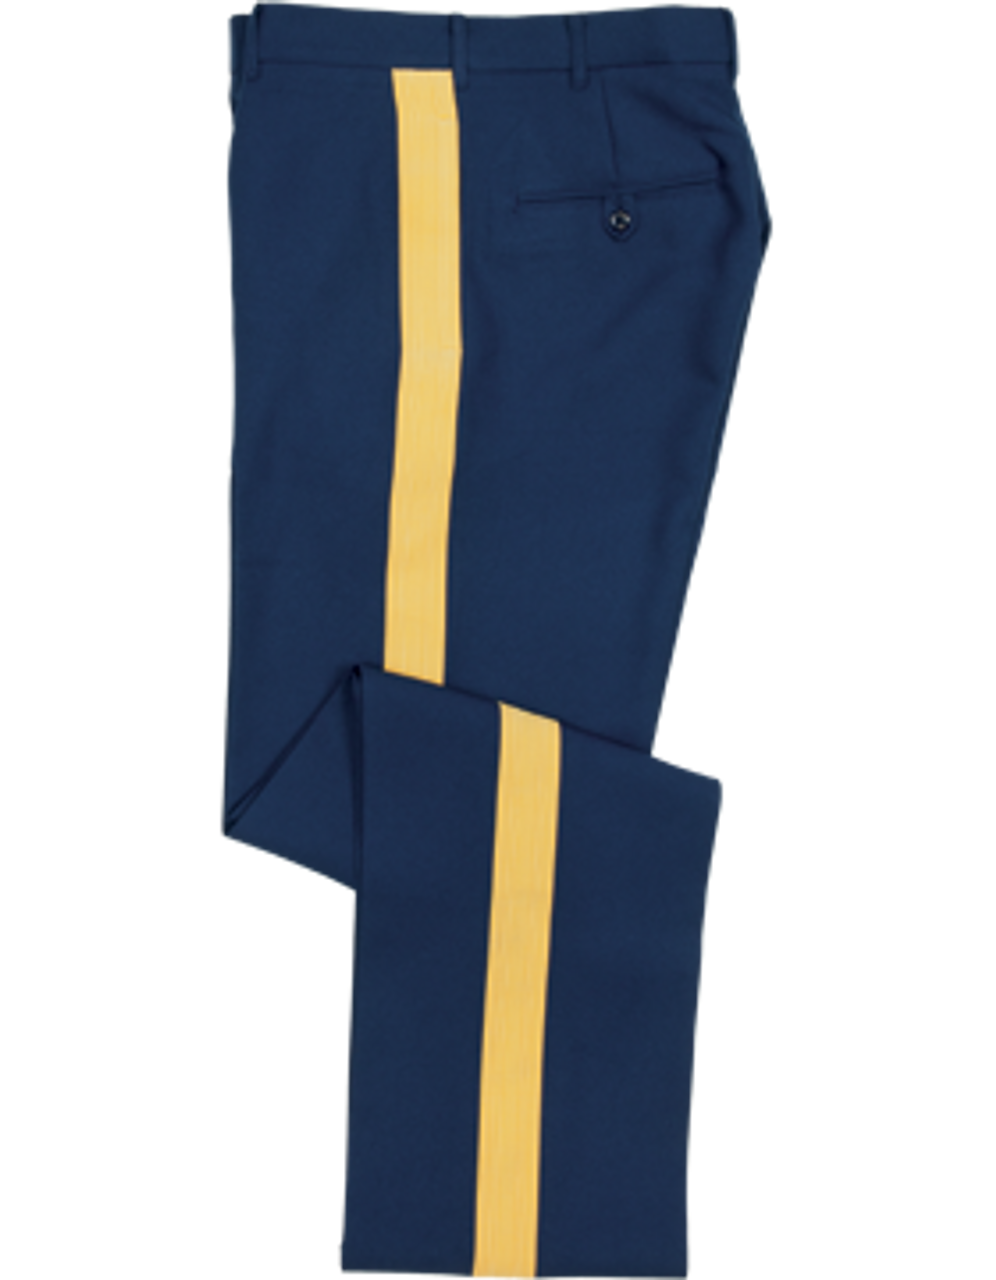 Wholesale navy blue uniform pants - Outfits And Military Accessories 